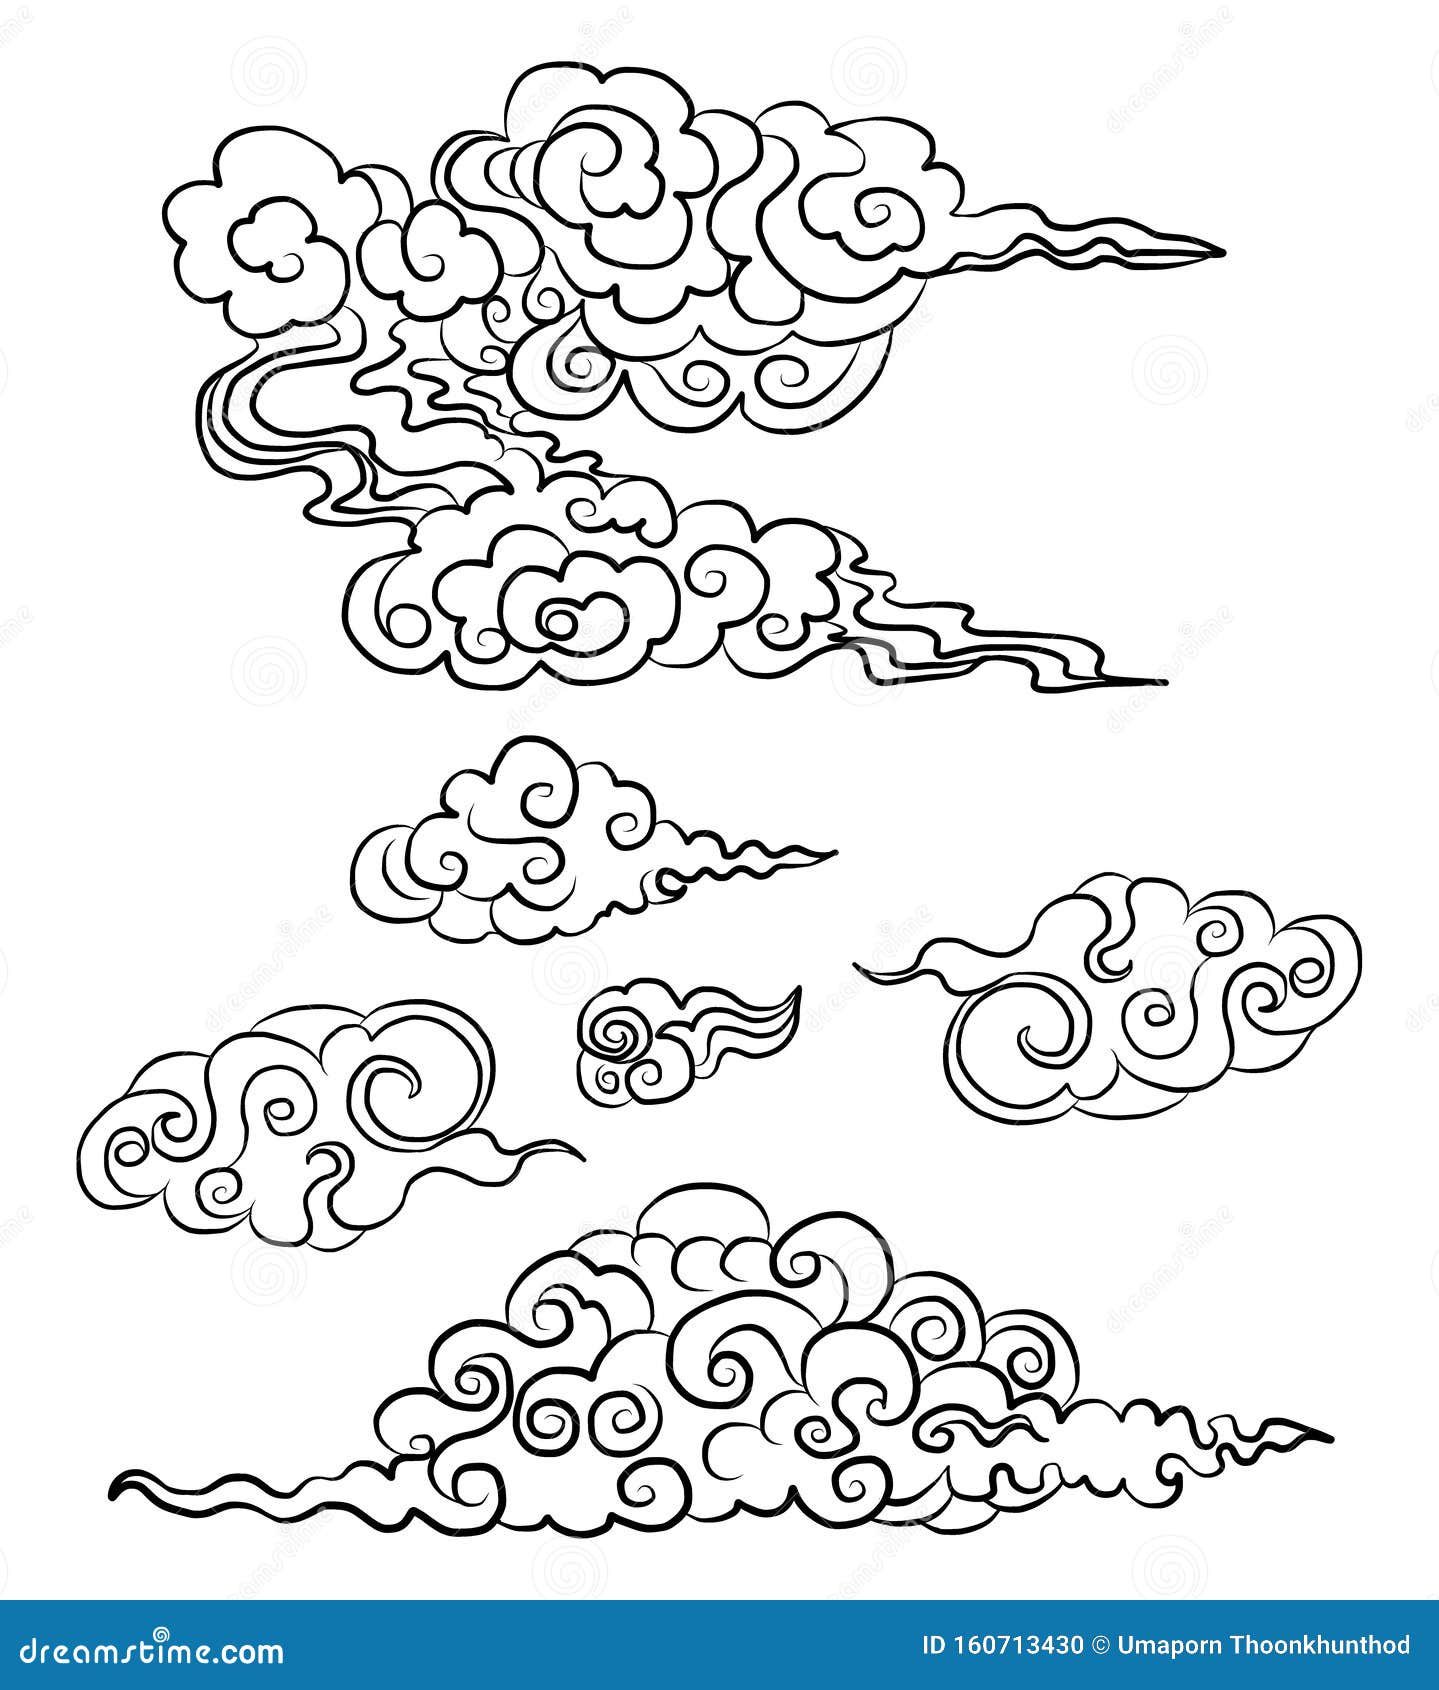 Idea For Tattoo And Coloring Books Japanese Clouds And Wave For Tattoo Design Chinese Clouds Stock Vector Illustration Of Demon Flower 160713430